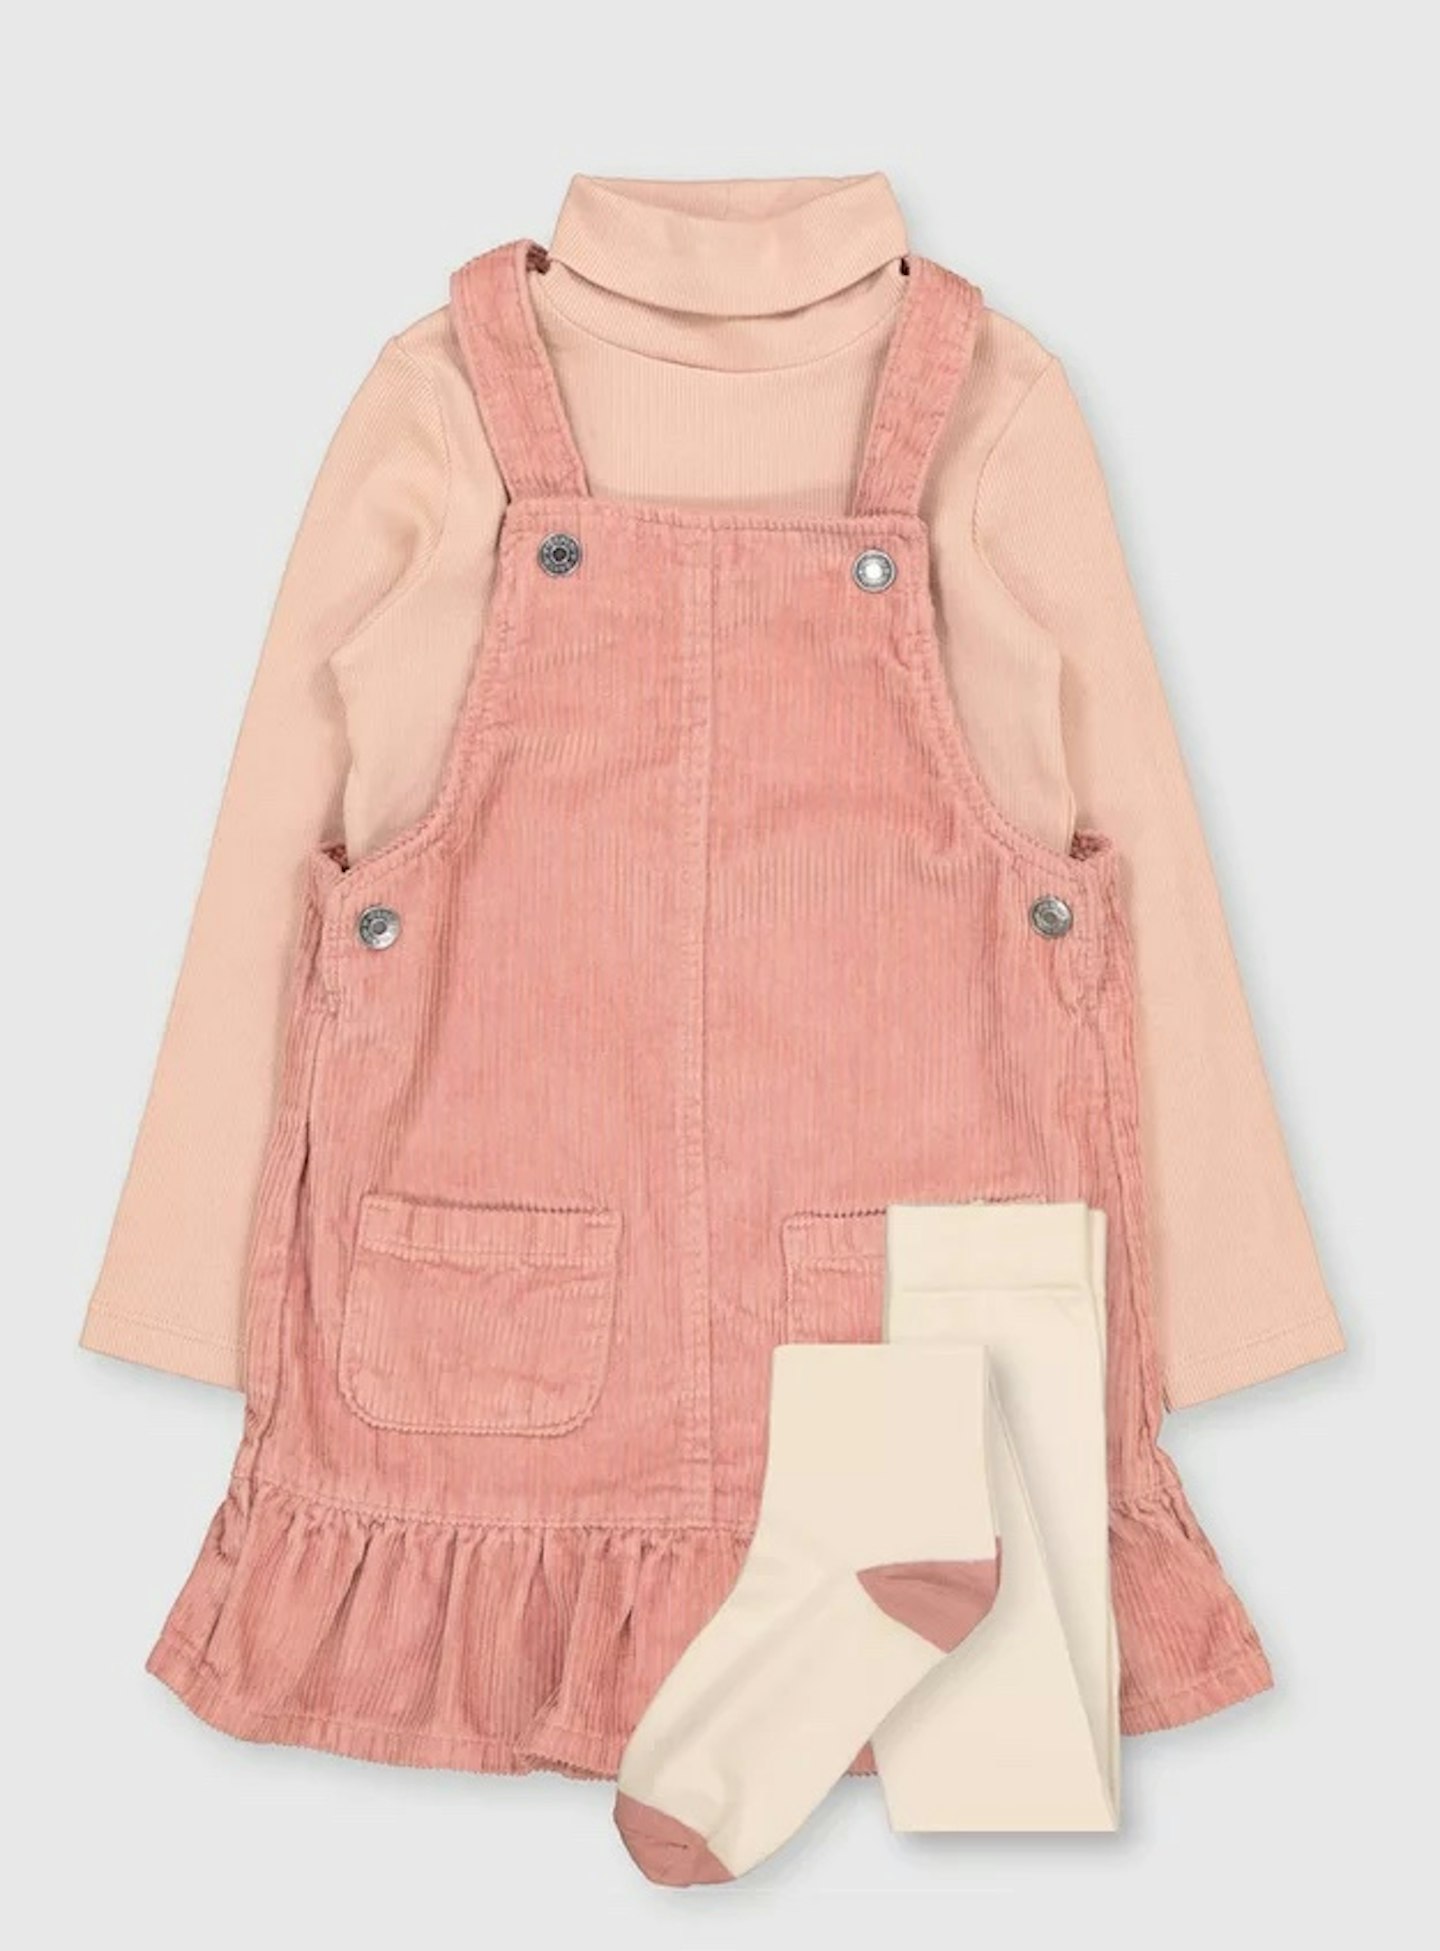 Pink Pinafore, Tights & Top Set (1-7 Years), From £15.00